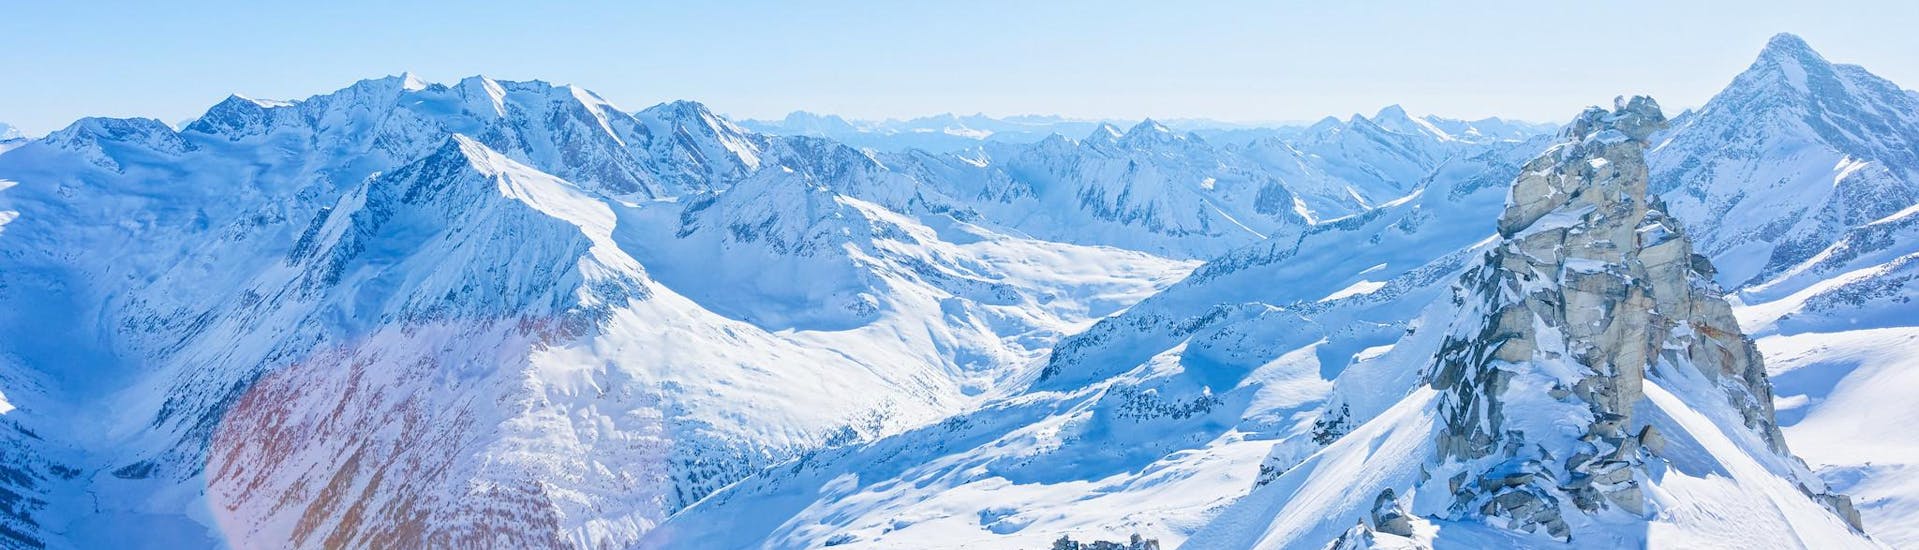 View of the snow-covered peaks of Hintertux Glacier, where local ski schools offer their ski lessons.